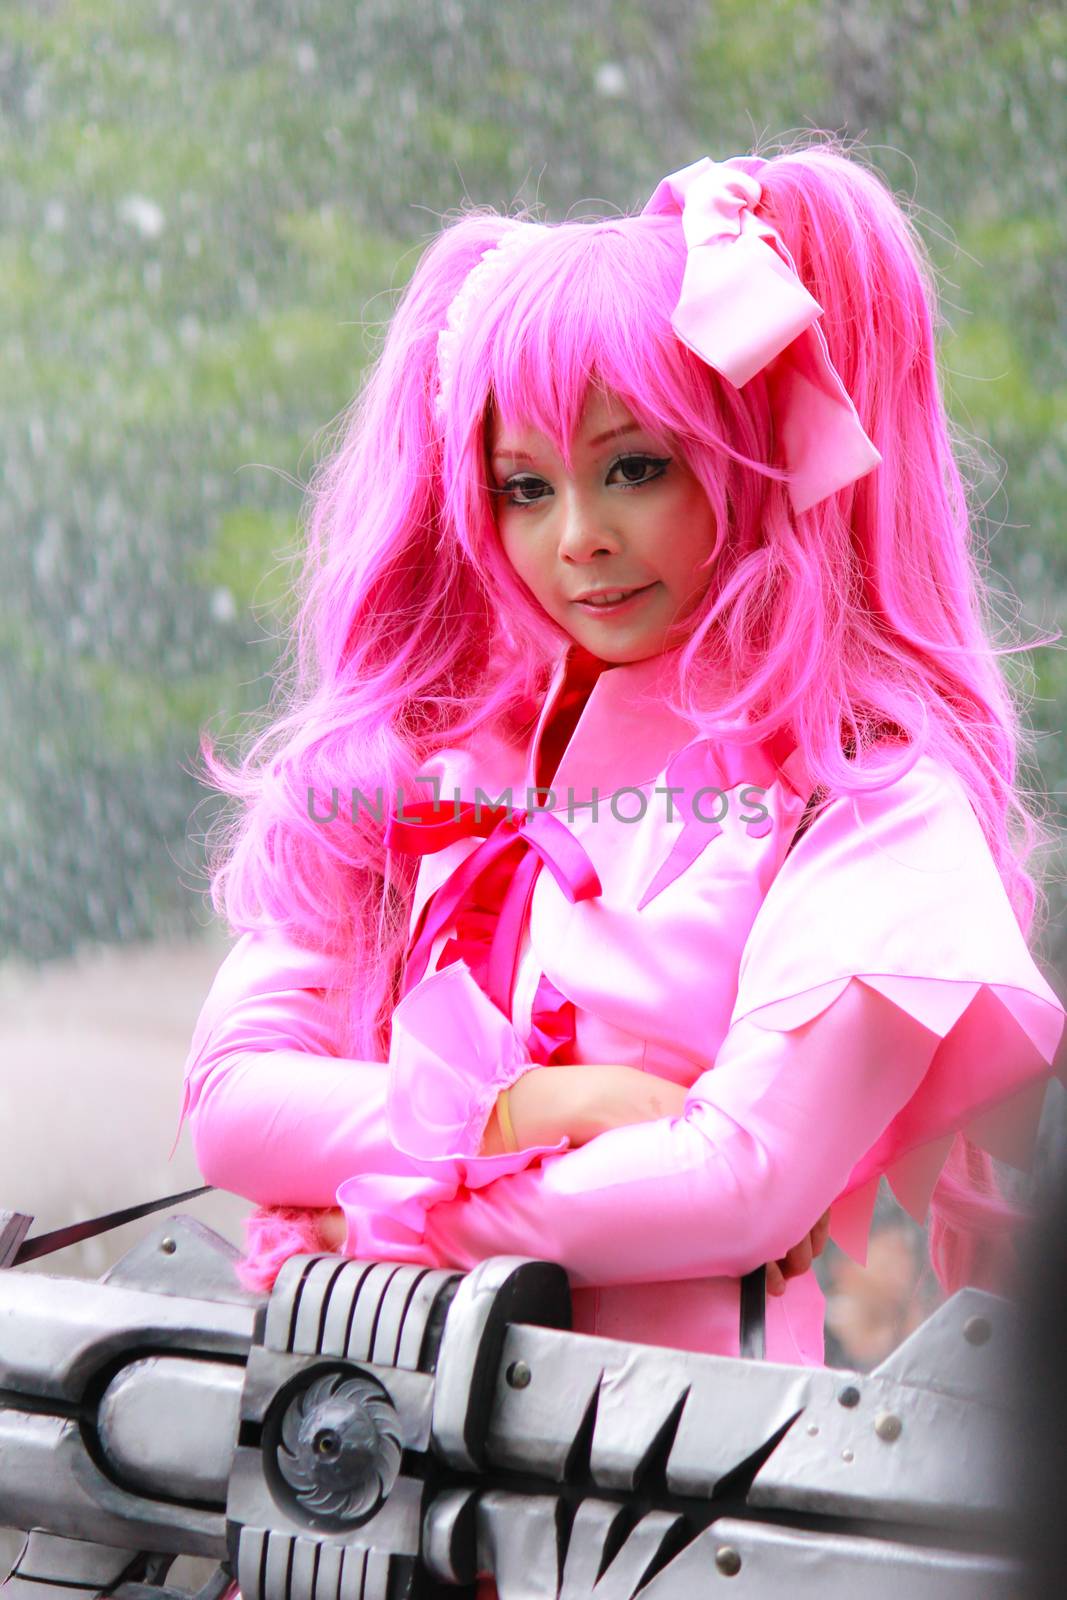 Bangkok - Aug 31: An unidentified Japanese anime cosplay Mine pose  on August 31, 2014 at Central World, Bangkok, Thailand.